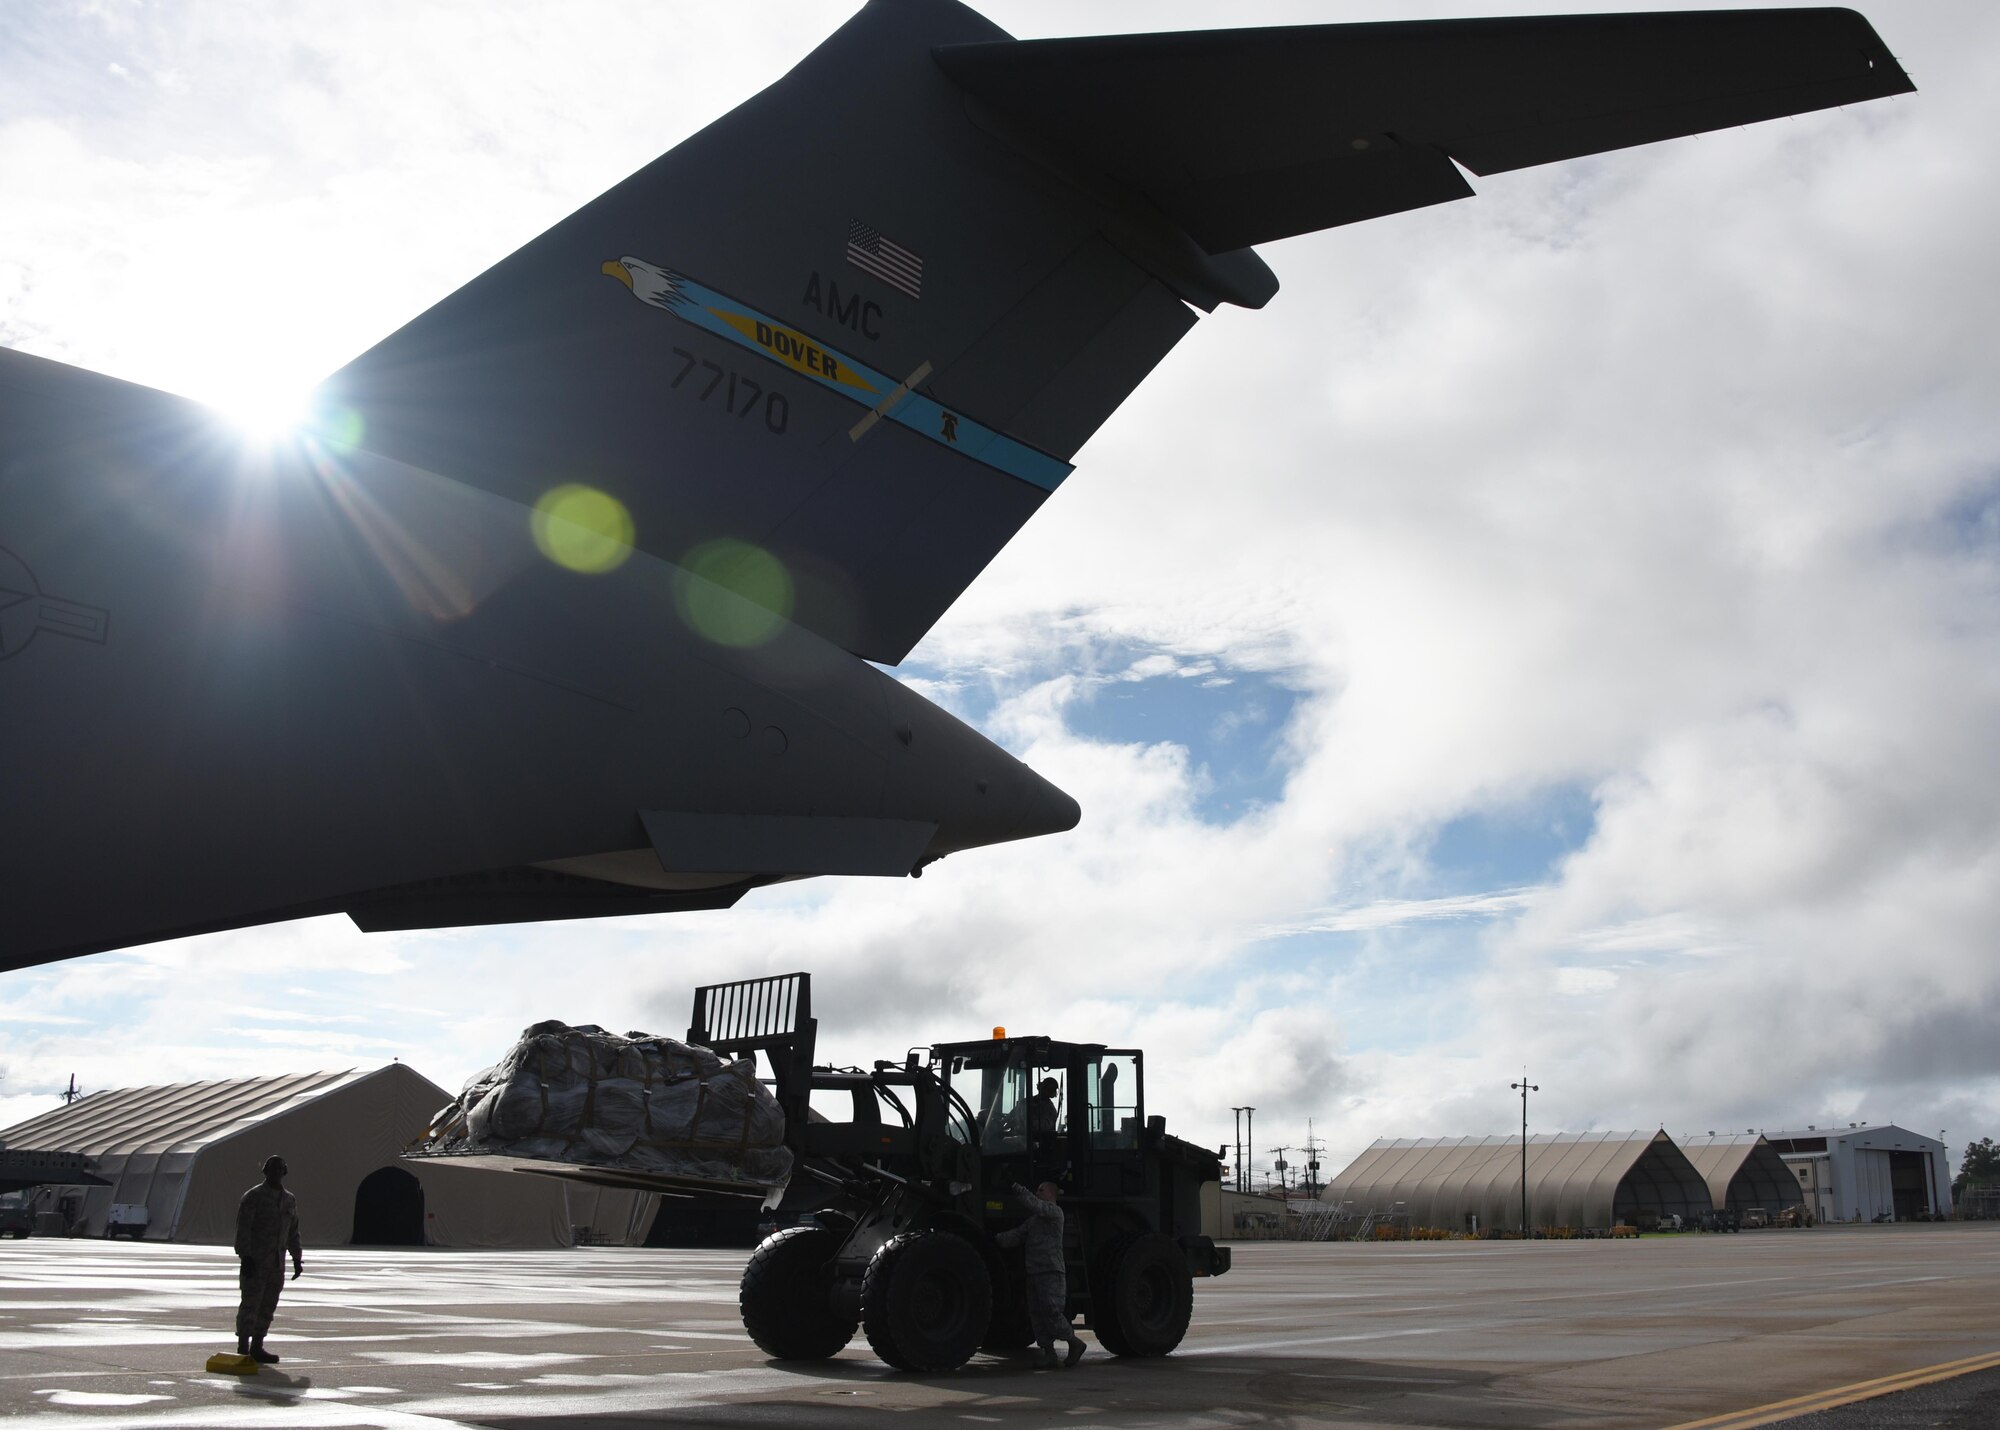 Logistics crews from the 612th Air Base Squadron load a C-17 Globemaster III cargo aircraft at Soto Cano Air Base, Honduras, with equipment destined for Port-au-Prince, Haiti to support Joint Task Force Matthew hurricane relief operations, Oct. 8, 2016. This C-17 was one of two aircraft rapidly deployed to Soto Cano to provide airlift for sustainment supplies and additional JTF-Bravo and Special Purpose Marine Air-Ground Task Force-Southern Command personnel who are conducting disaster relief efforts as part of JTF-Matthew using two CH-53E Super Stallion, three CH-47 Chinook, and two UH-60L and two HH-60L Black Hawk helicopters. (U.S. Air Force photo by Capt. David Liapis)